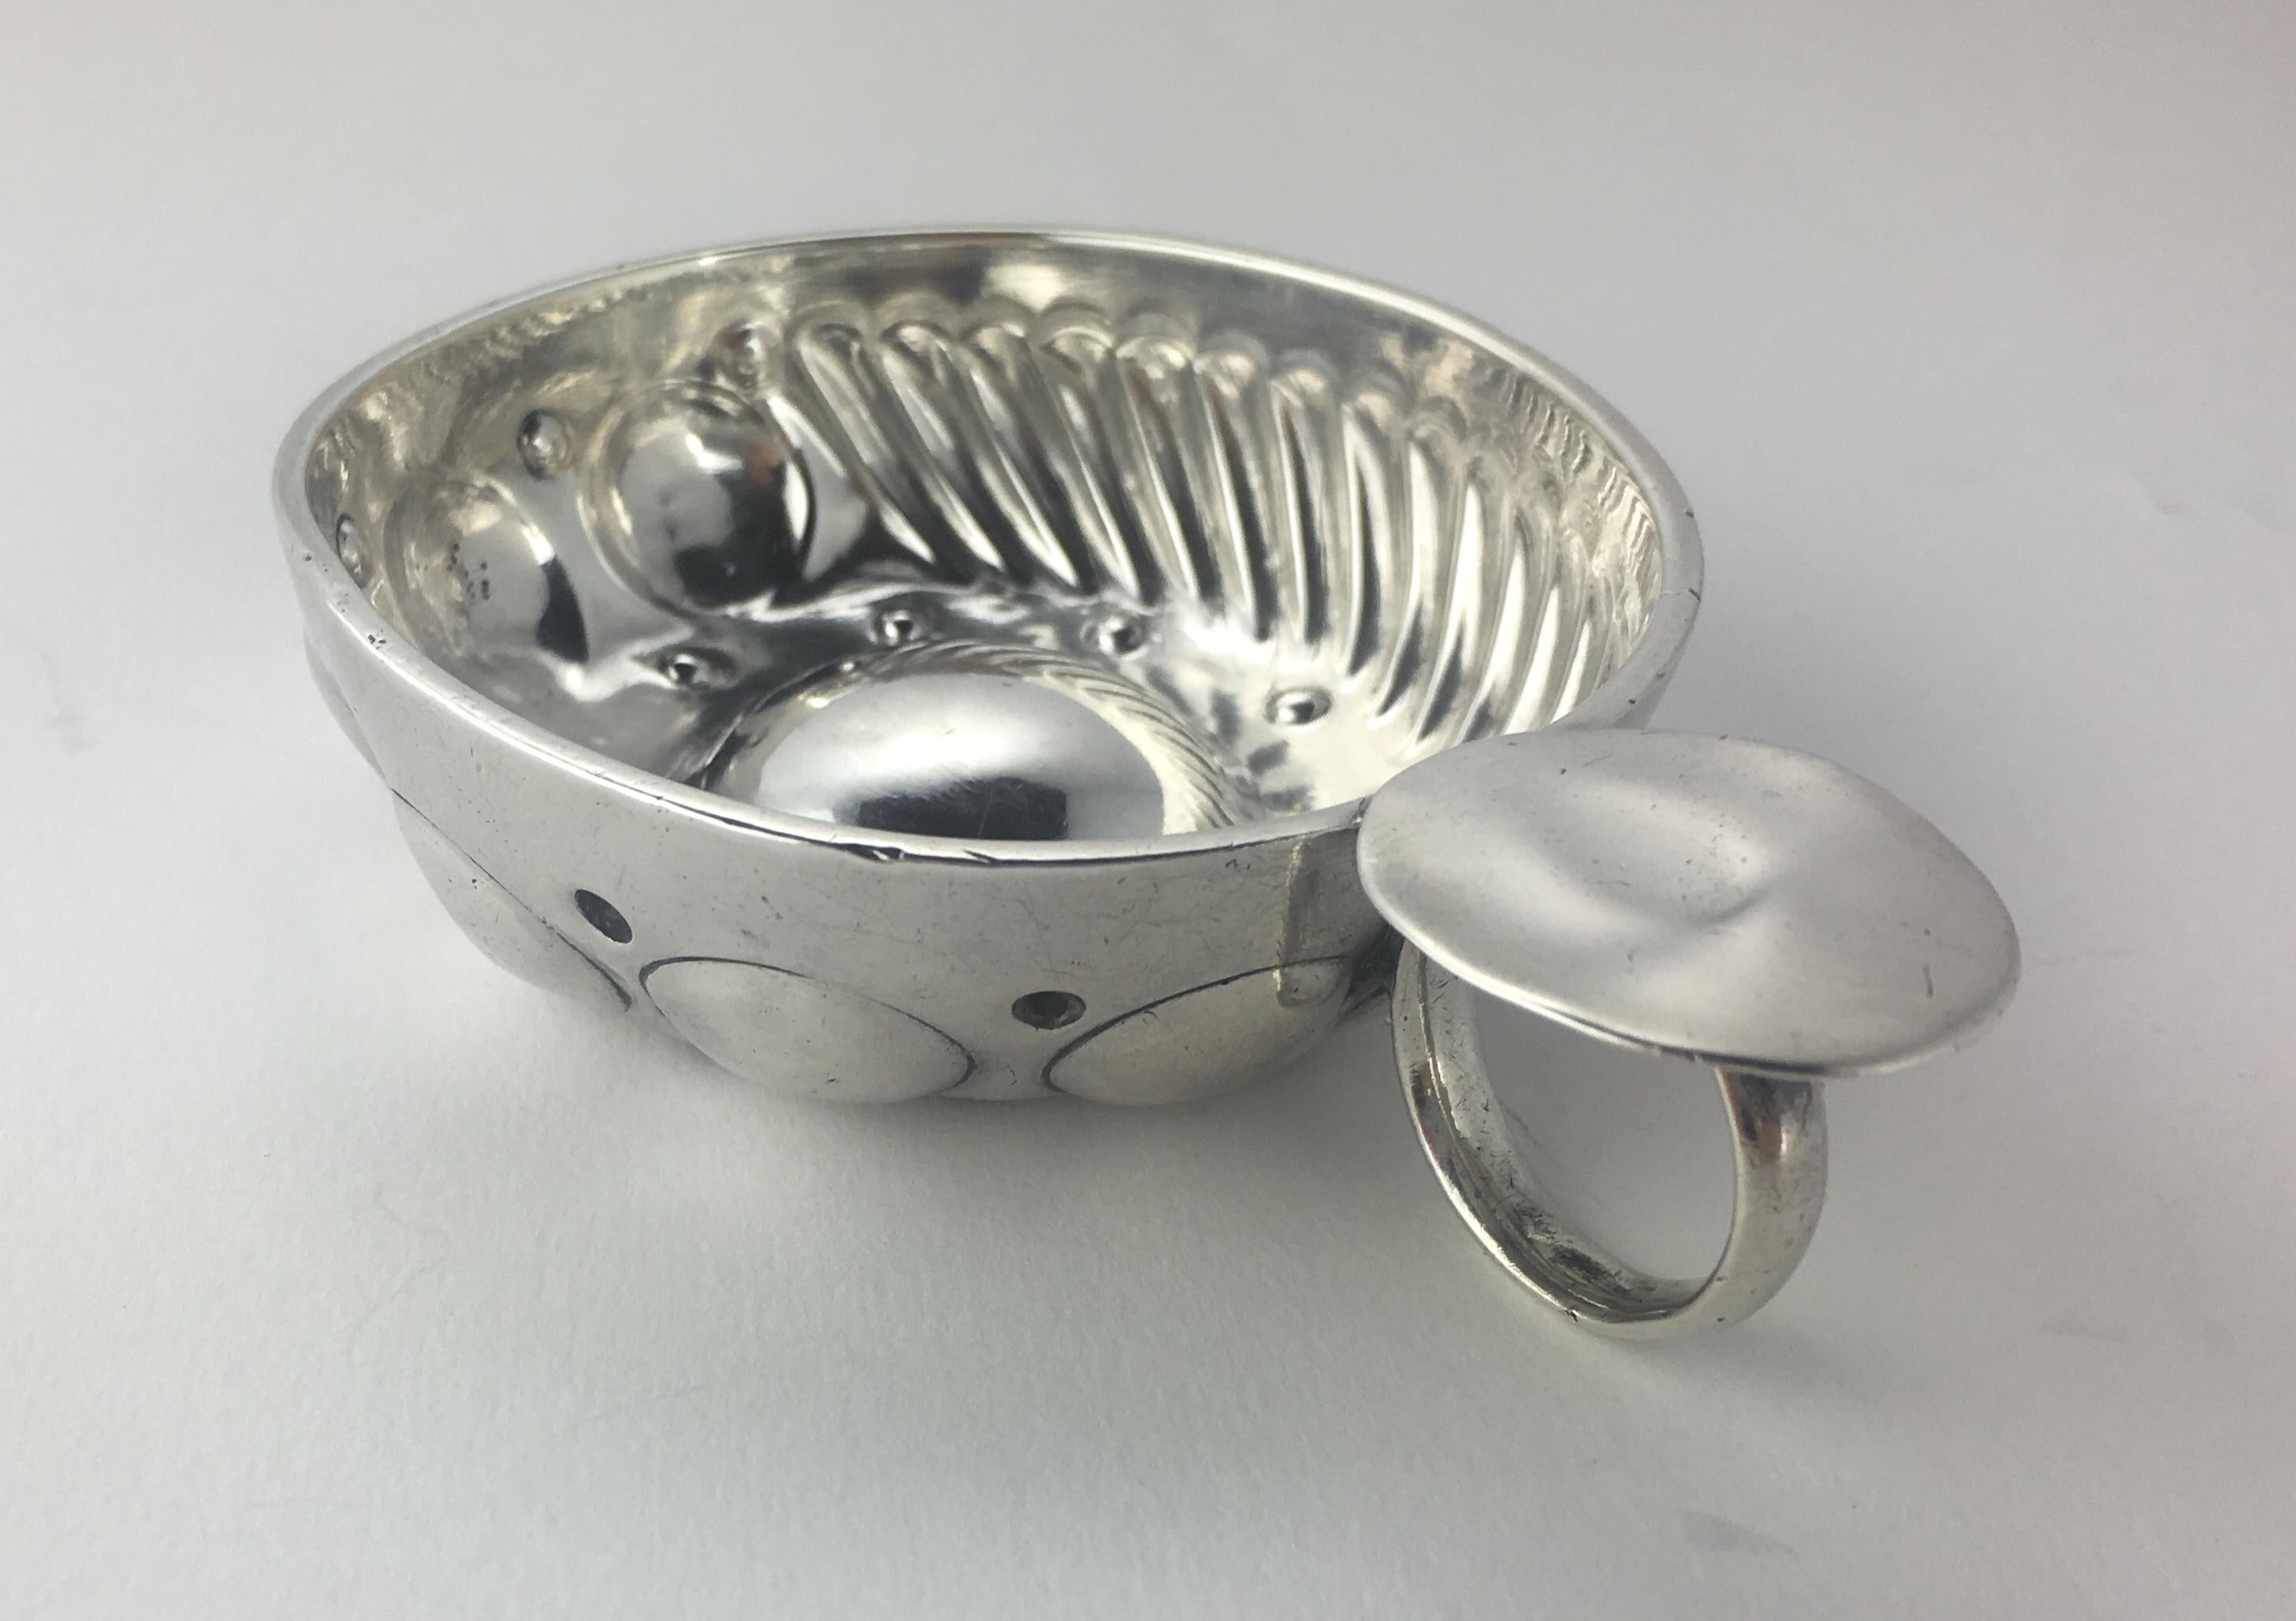 Antique French silver test de vin, circa 1880.
The test de vin of usual form, the lower part of bowl with a surround of concave and swirl lobate style decoration, ribbed thumb piece handle. Marked on handle and bowl.
Measures: 1